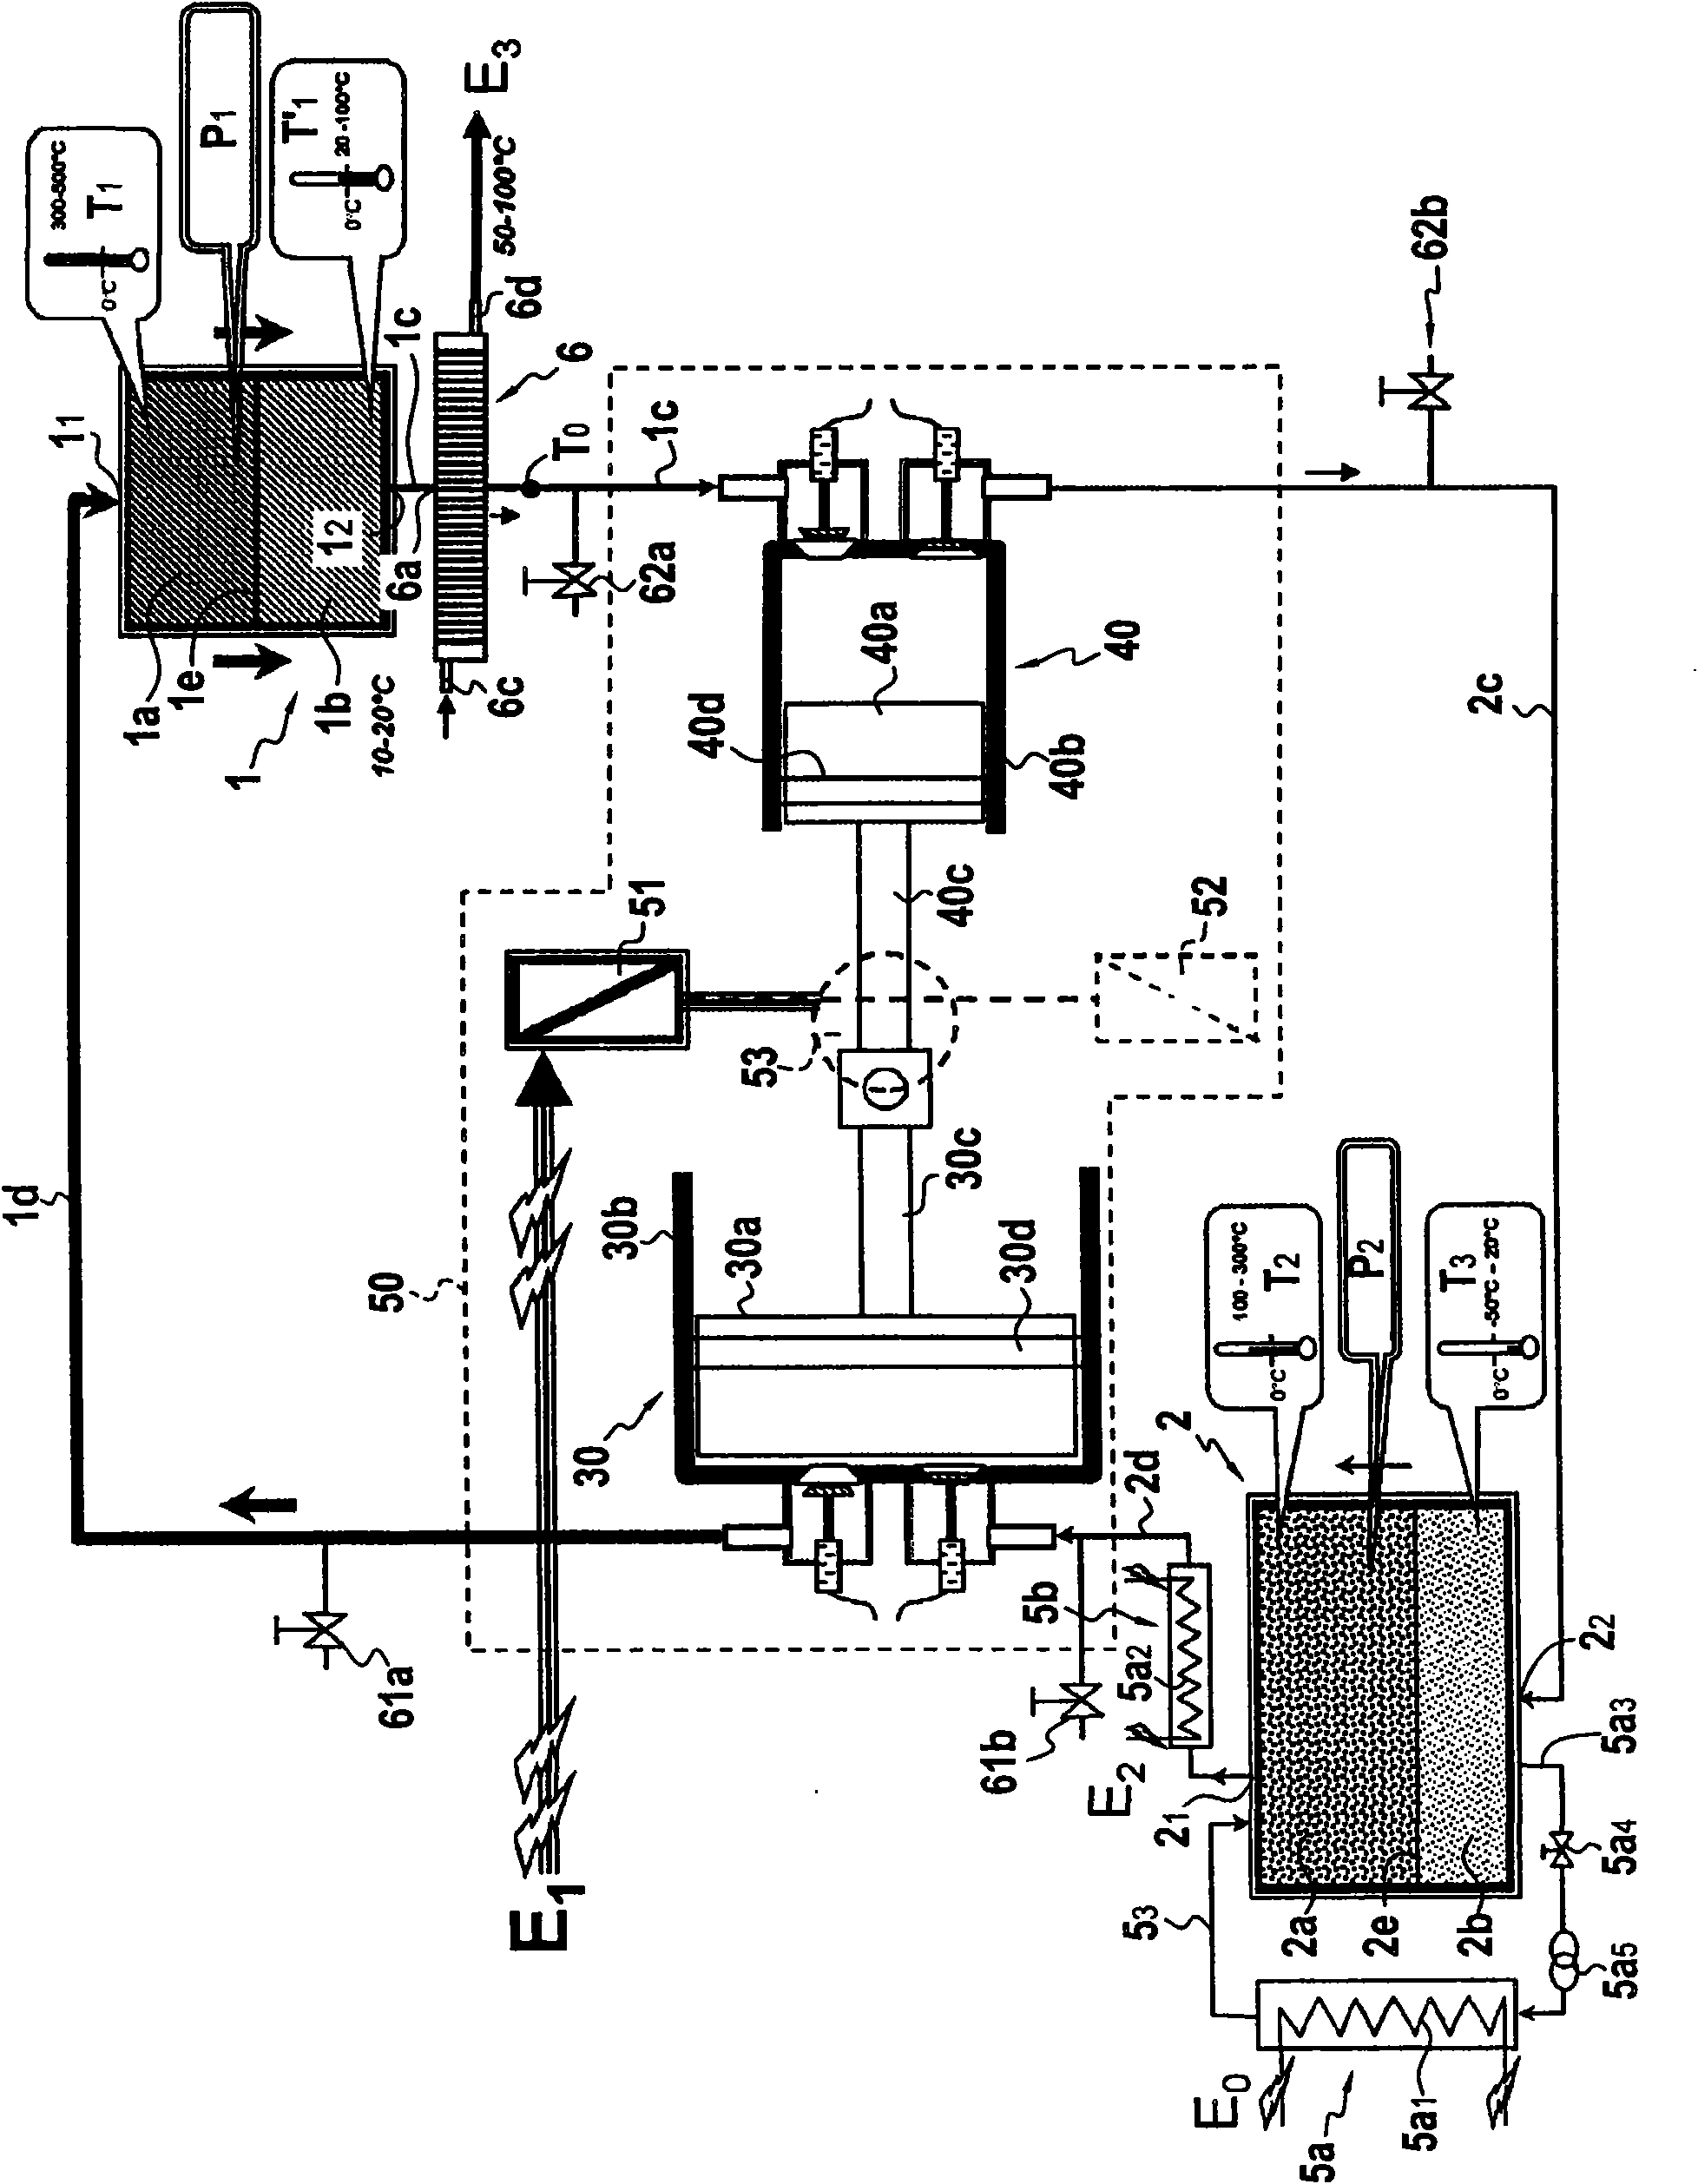 Installation and methods for storing and restoring electrical energy using a piston-type gas compression and expansion unit